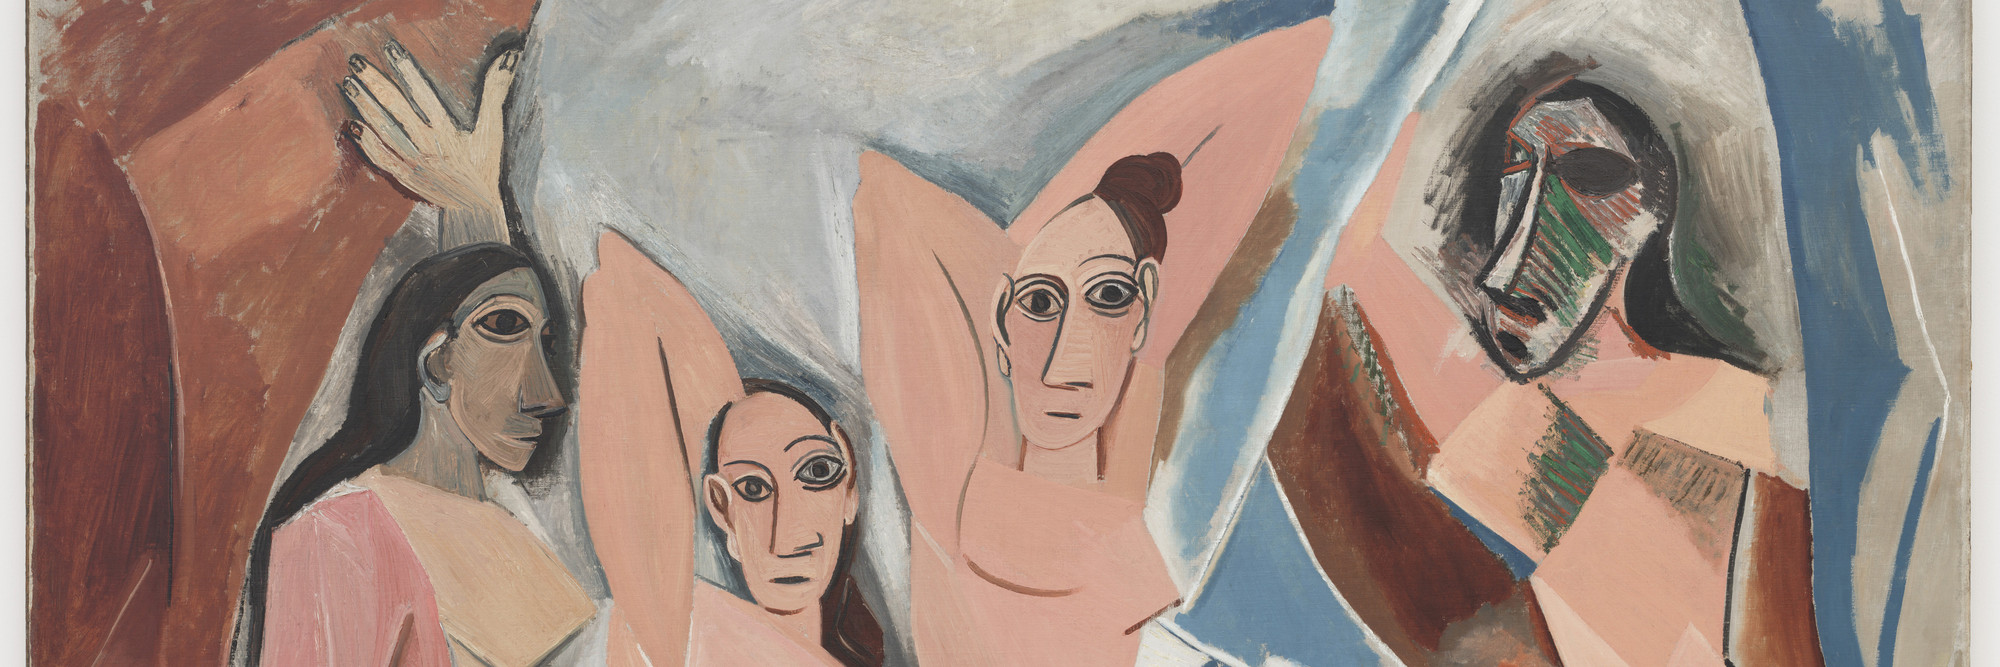 Pablo Picasso. Les Demoiselles d’Avignon. 1907. Oil on canvas, 8′ × 7′ 8″ (243.9 × 233.7 cm). Acquired through the Lillie P. Bliss Bequest. © 2005 Estate of Pablo Picasso/Artists Rights Society (ARS), New York